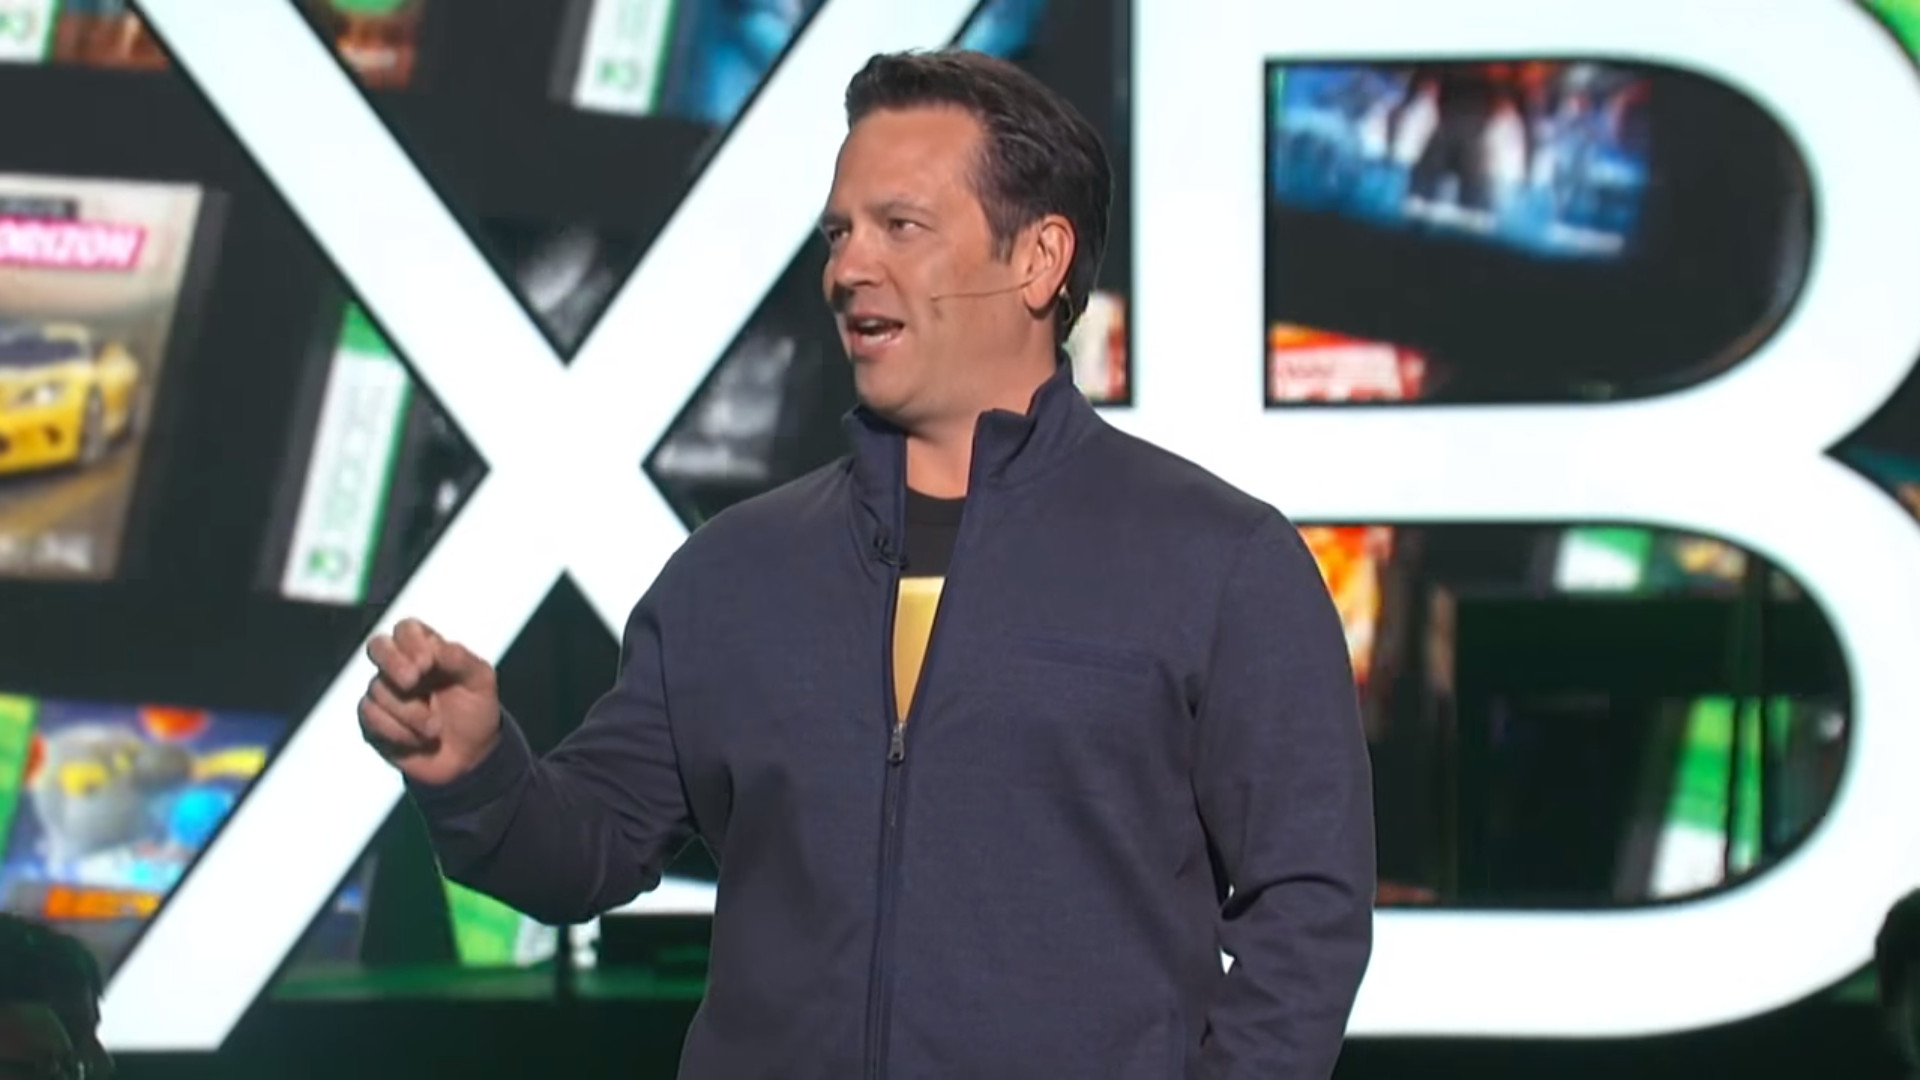 Phil Spencer presents at an Xbox event